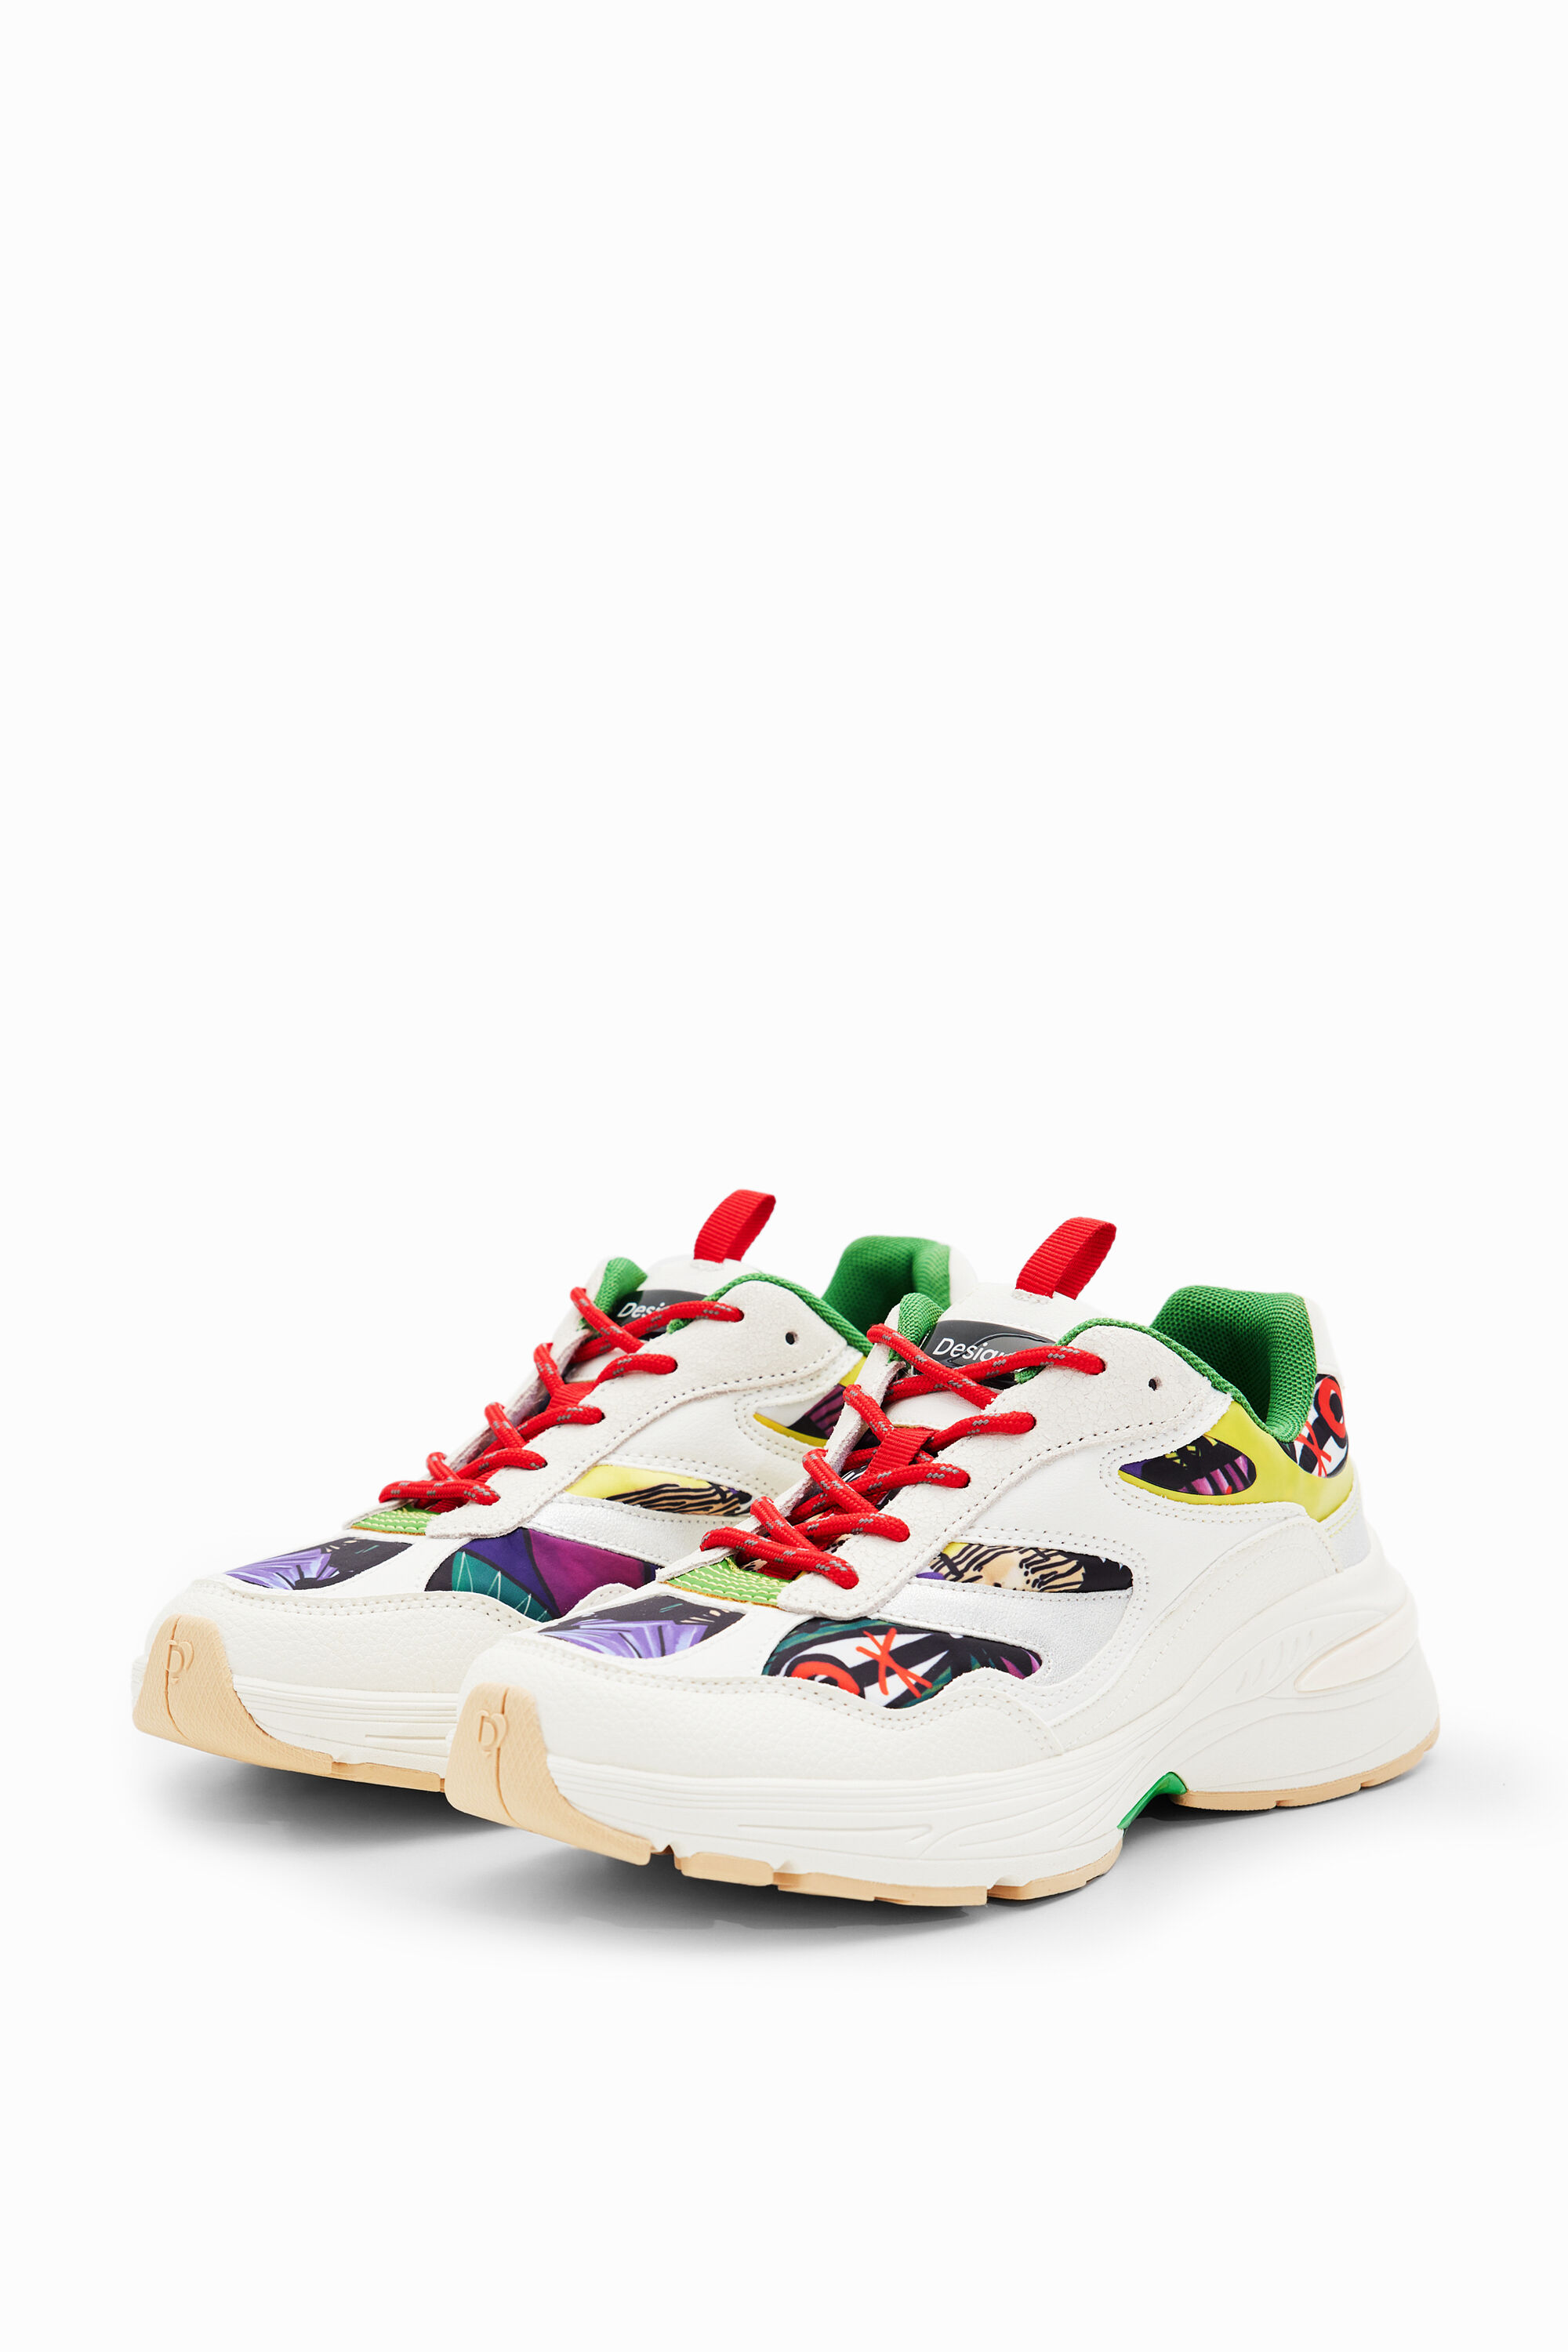 New Beautiful Colorful Nice Balenciaga Gucci Running Shoes Sneakers Trainers  – Stock Editorial Photo © sozon #342730920